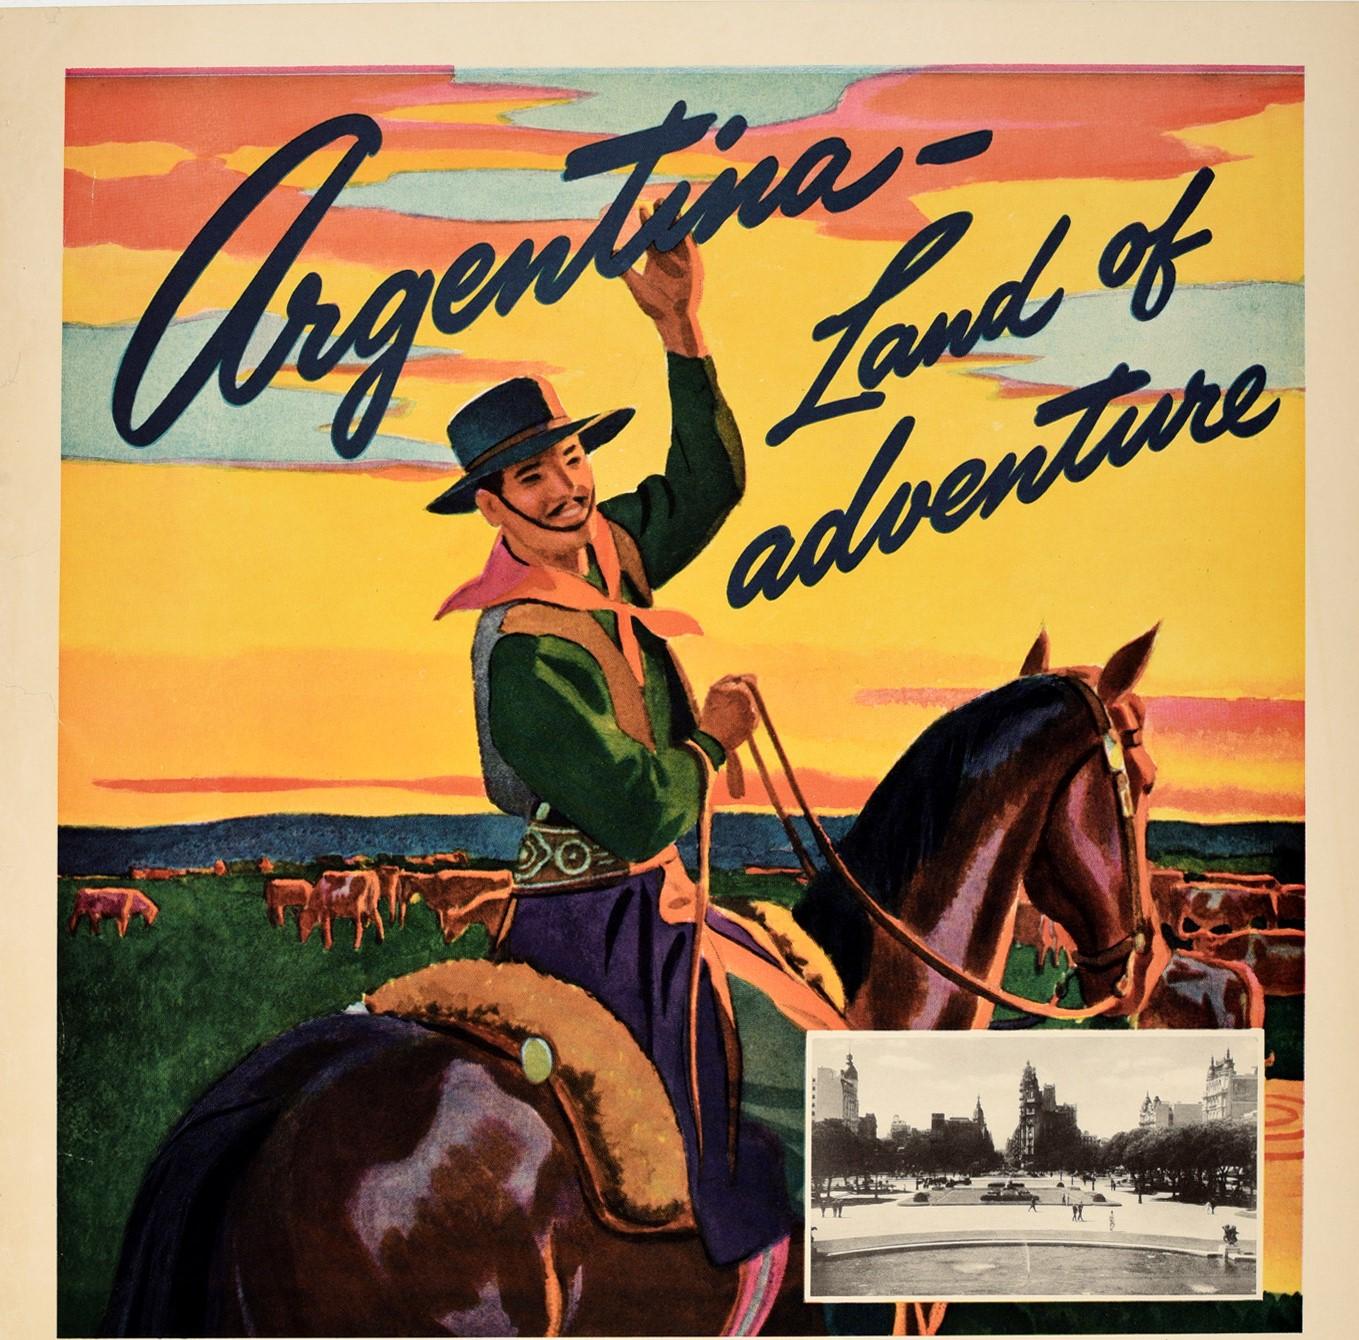 Original vintage South America cruise travel poster - Argentina Land of Adventure 45 day leisure way cruise SS Argentina sails February 13 / 52 day Argentine cruise tour SS Brazil sails March 6 Moore McCormack Lines - featuring a colourful design